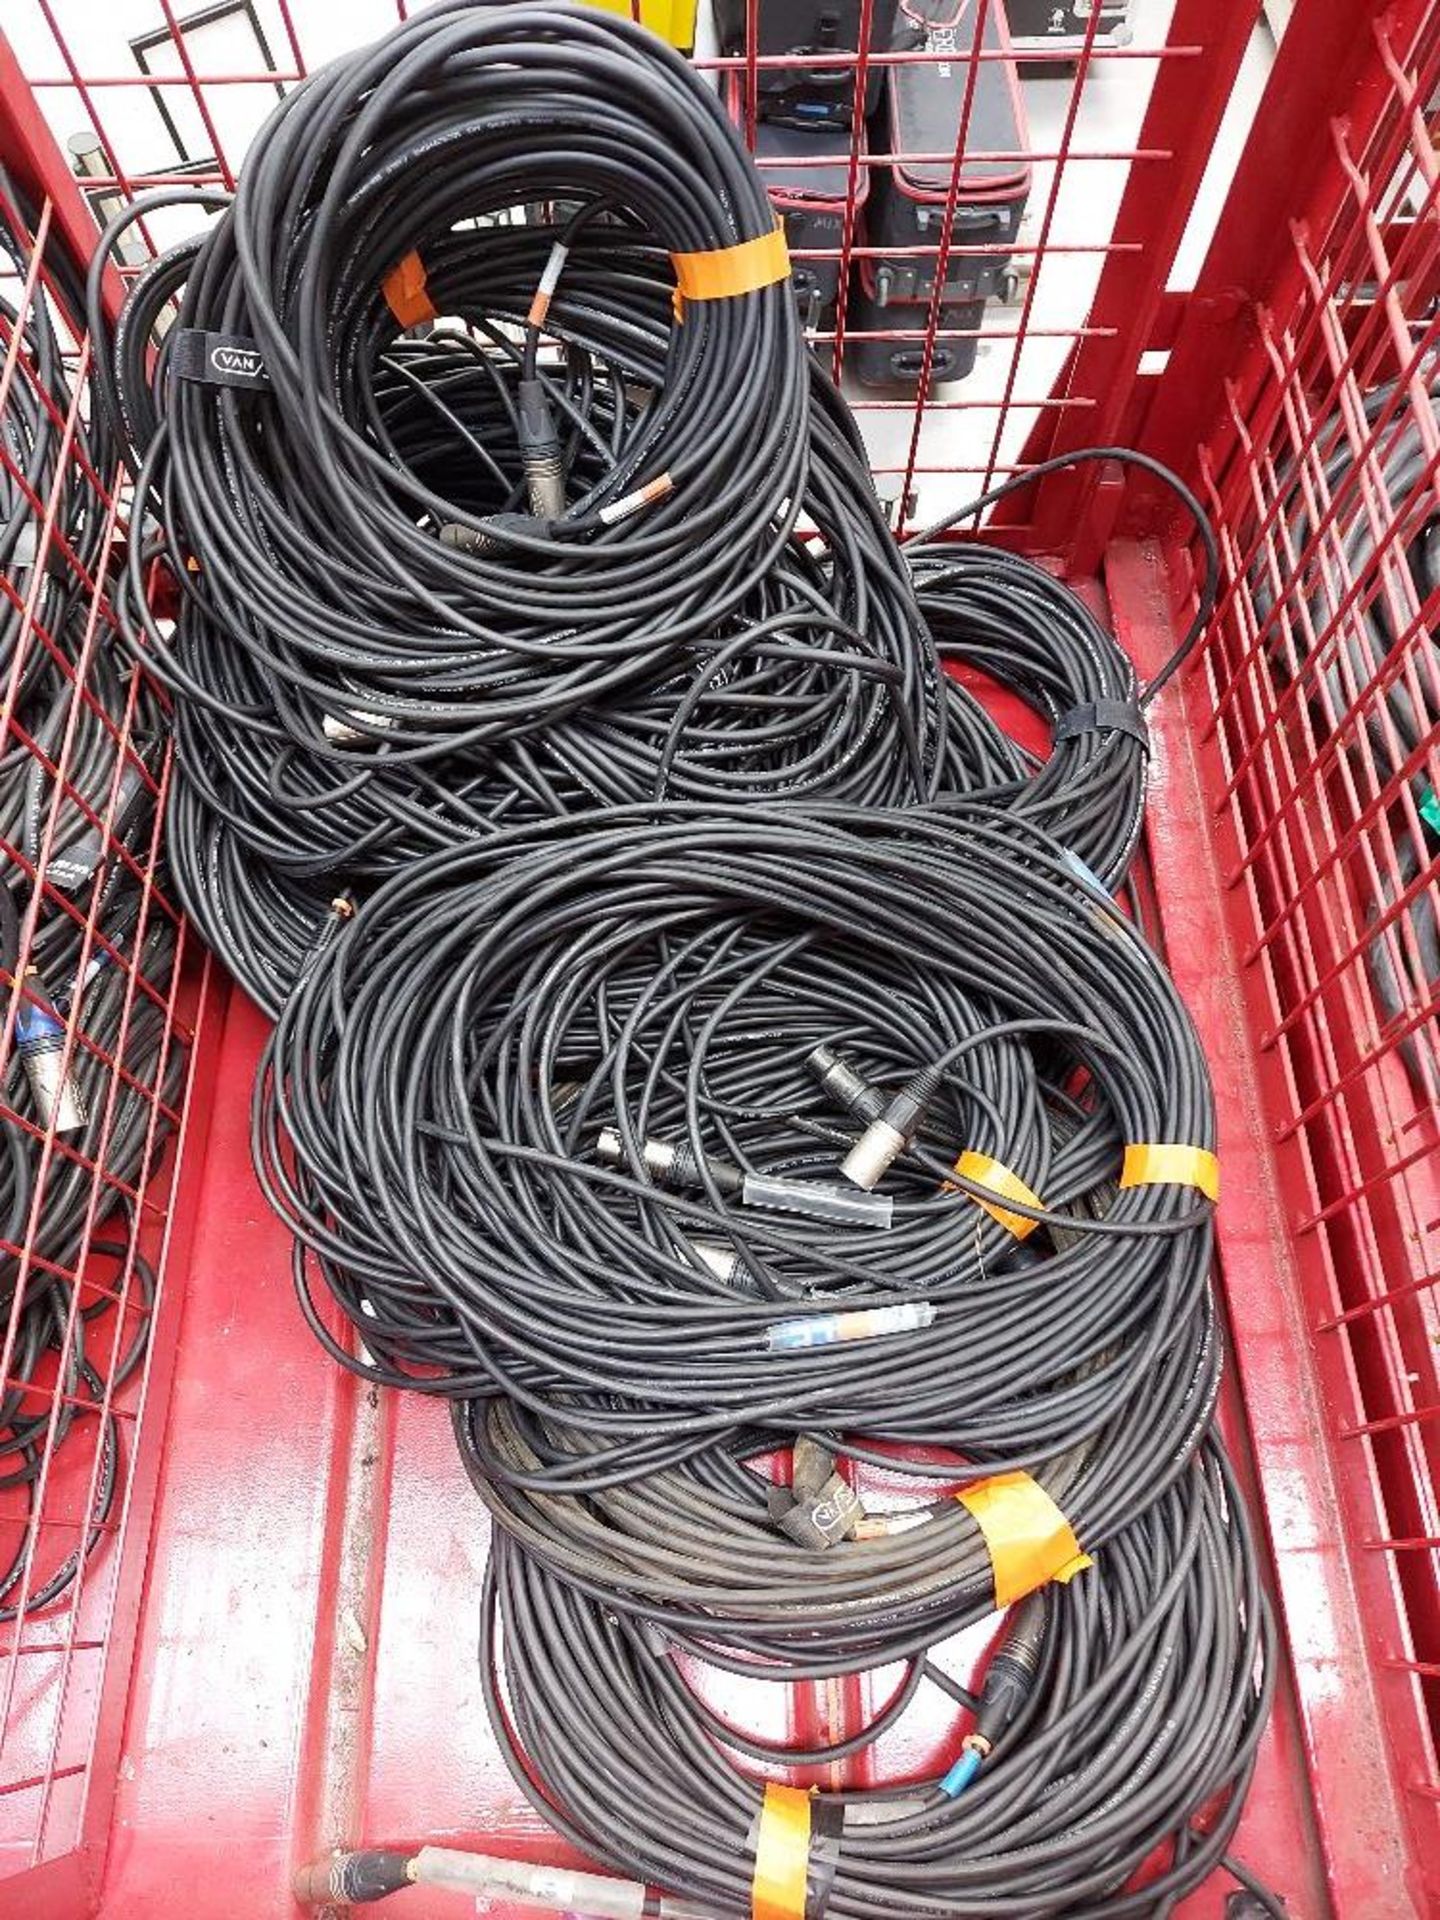 Large Quantity of 50m XLR3 Cable & Large Quantity 30M XLR3 Cable with Steel Fabricated Stillage - Image 2 of 5